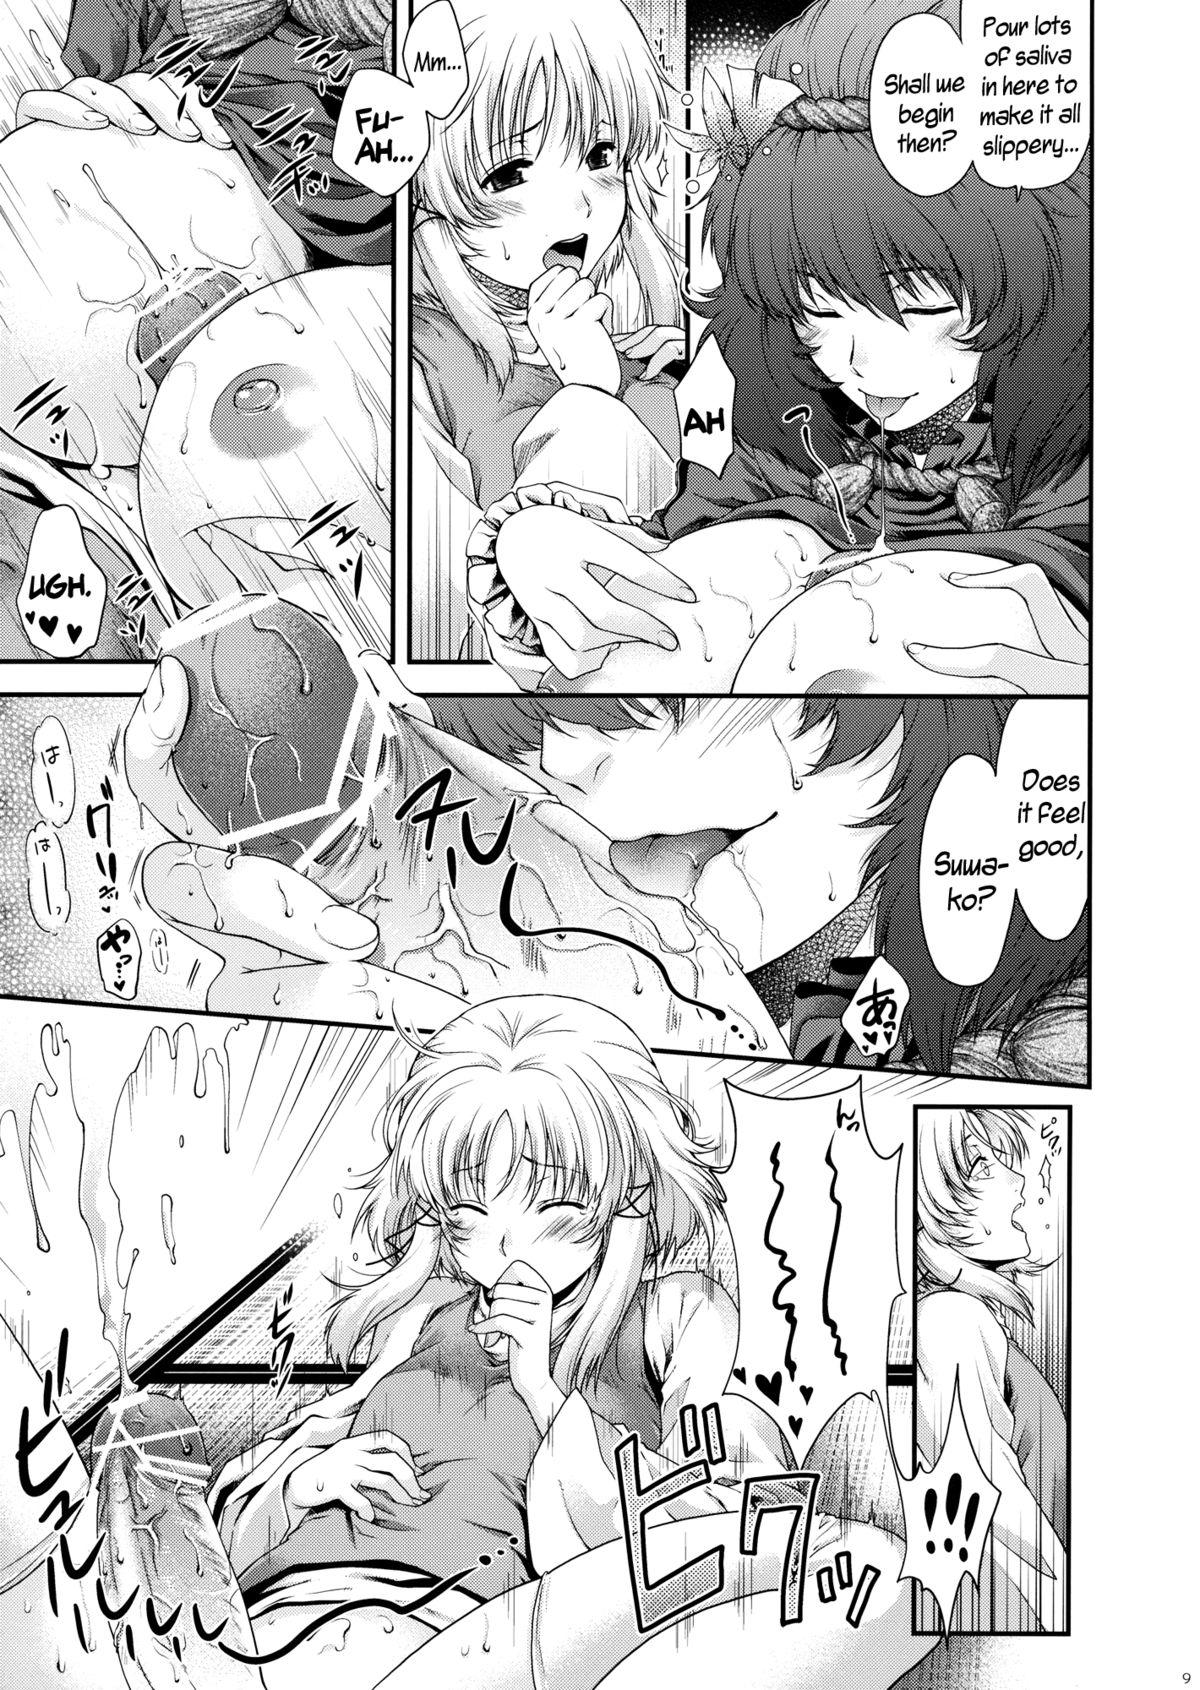 Missionary Position Porn SKB48 - Touhou project Petera - Page 9